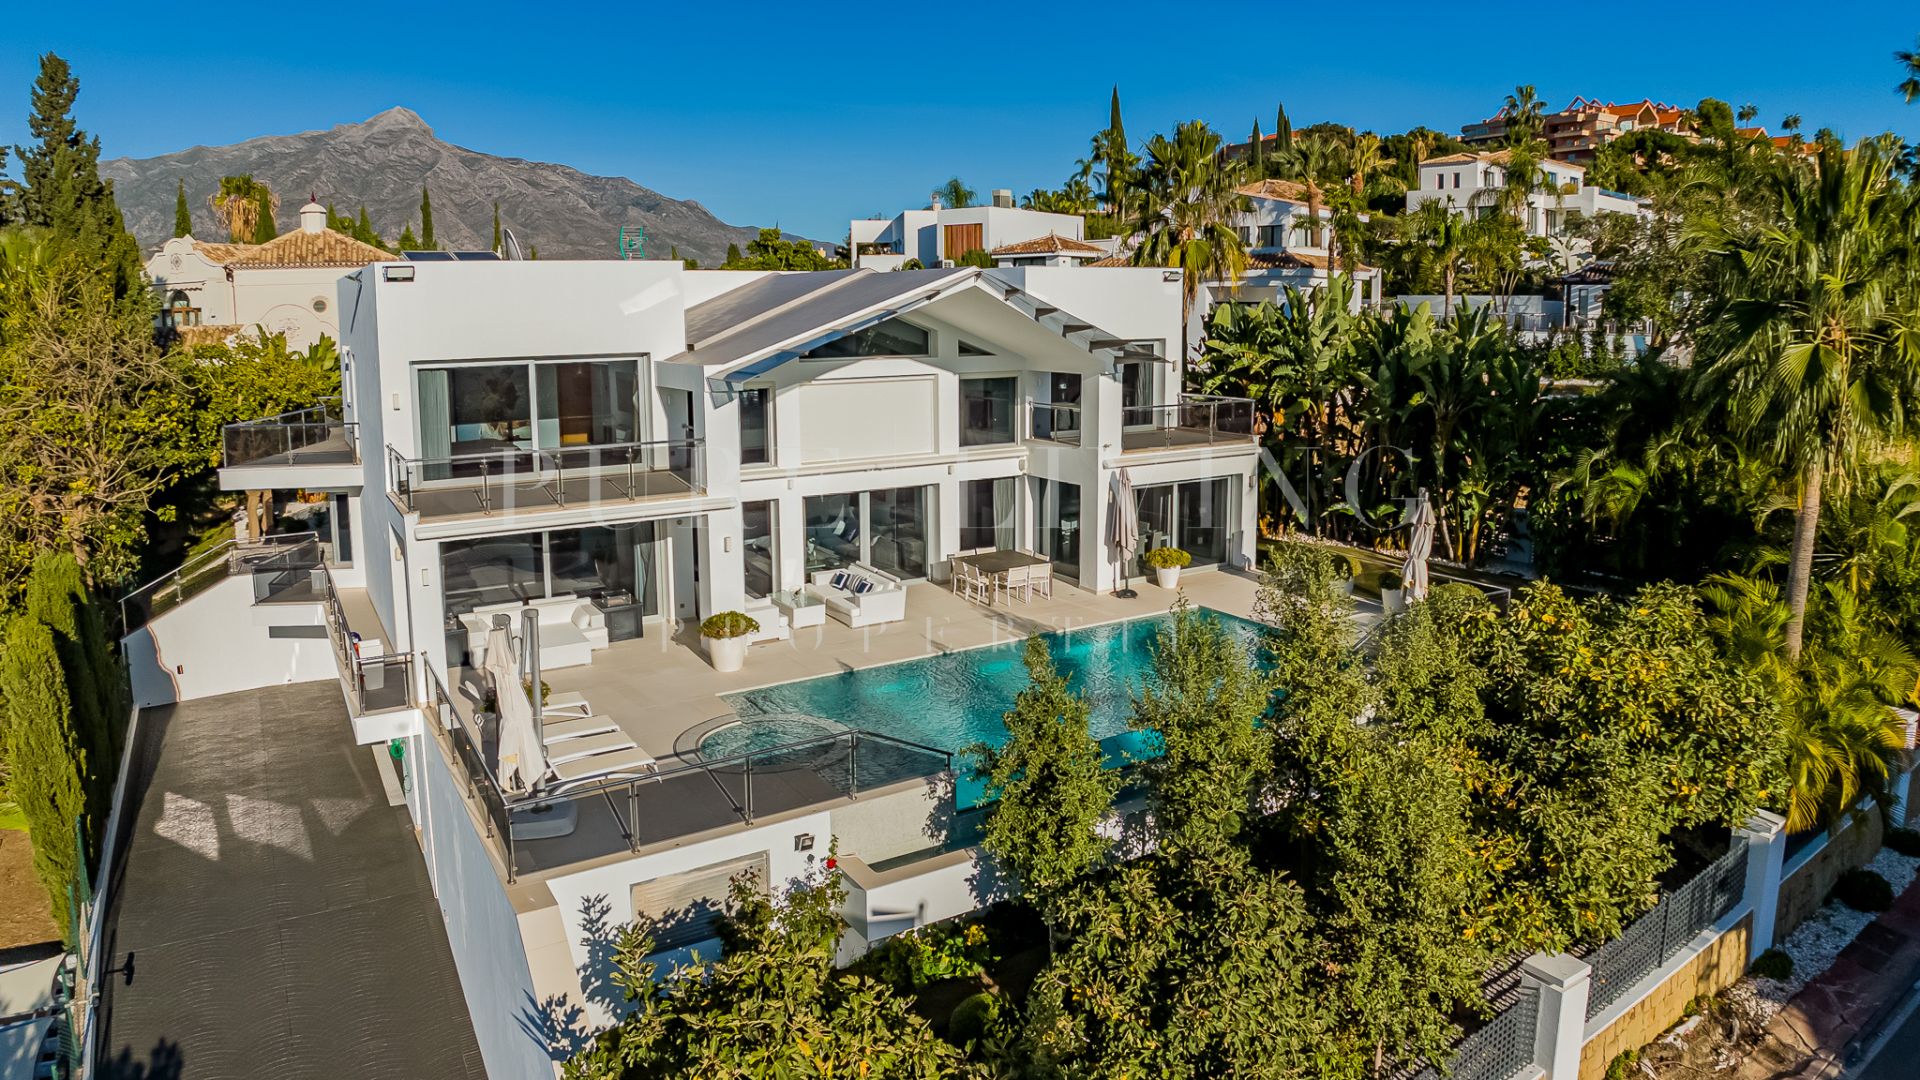 Exceptional five-bedroom residence situated in the prestigious Golf Valley of Nueva Andalucia, Marbella.